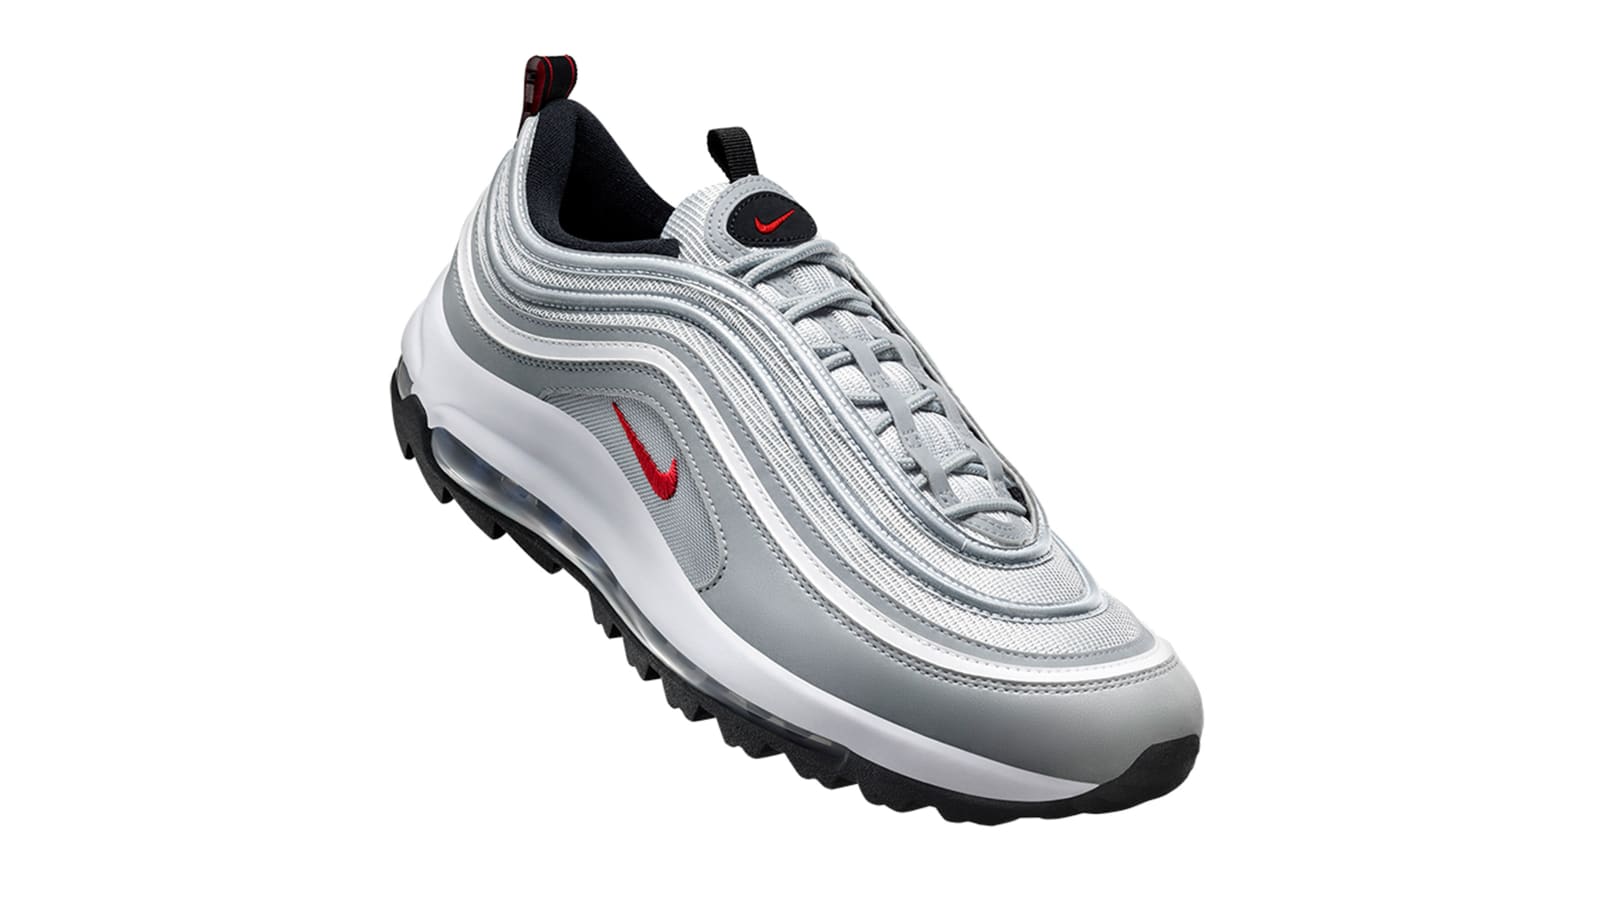 Nike Air Max 97 &quot;Silver Bullet&quot; Gets Turned Into Golf Shoe: Details